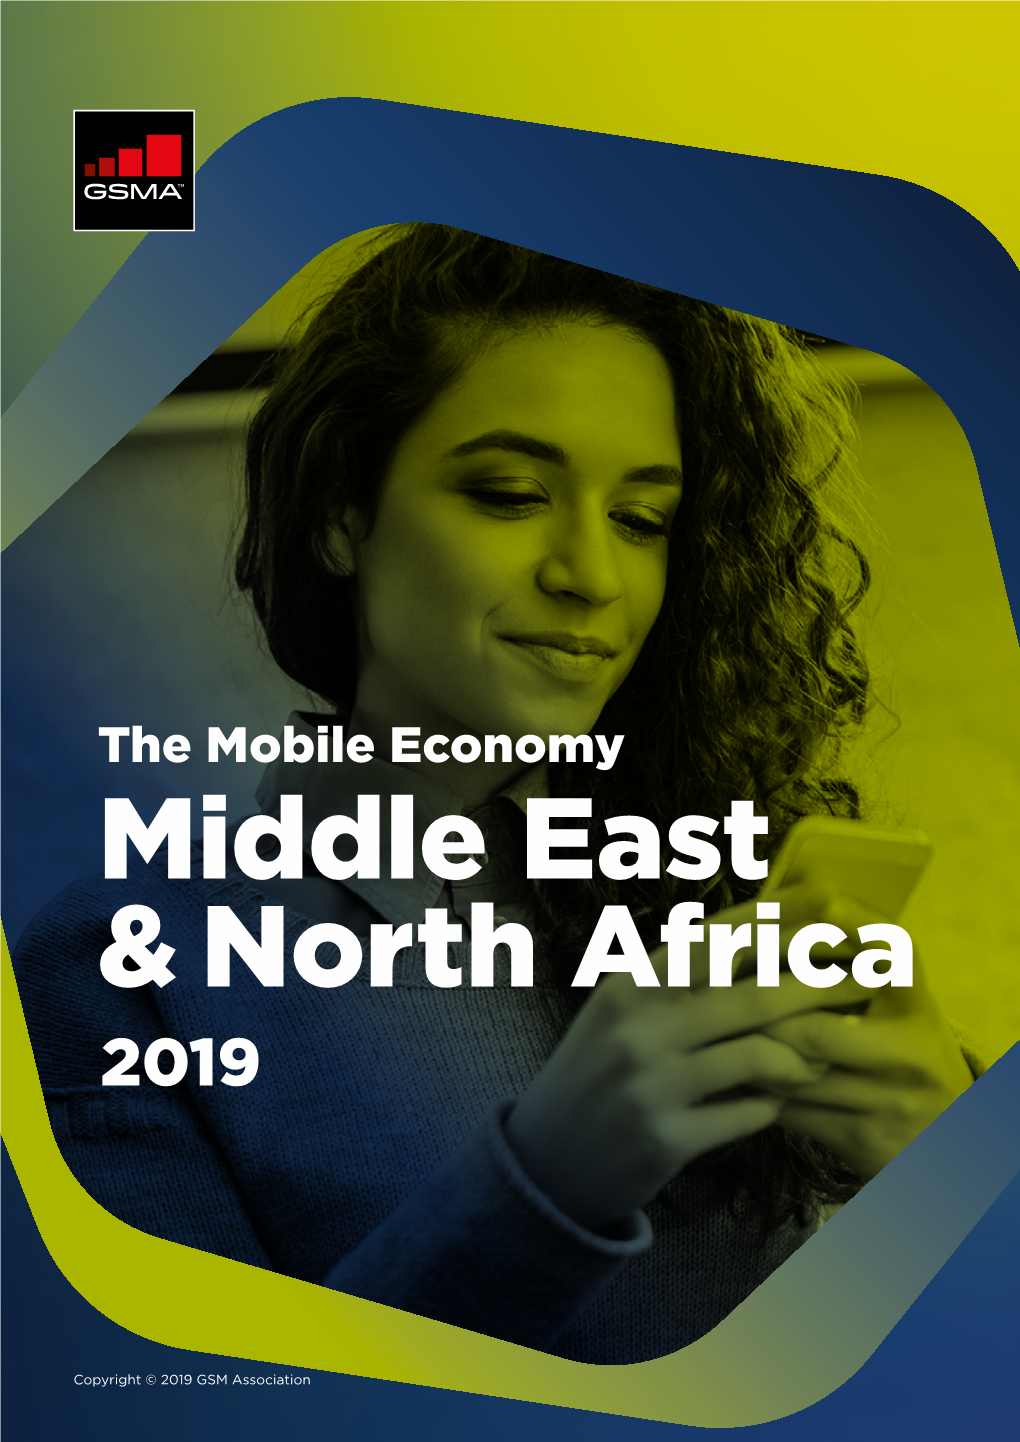 The Mobile Economy Middle East & North Africa 2019